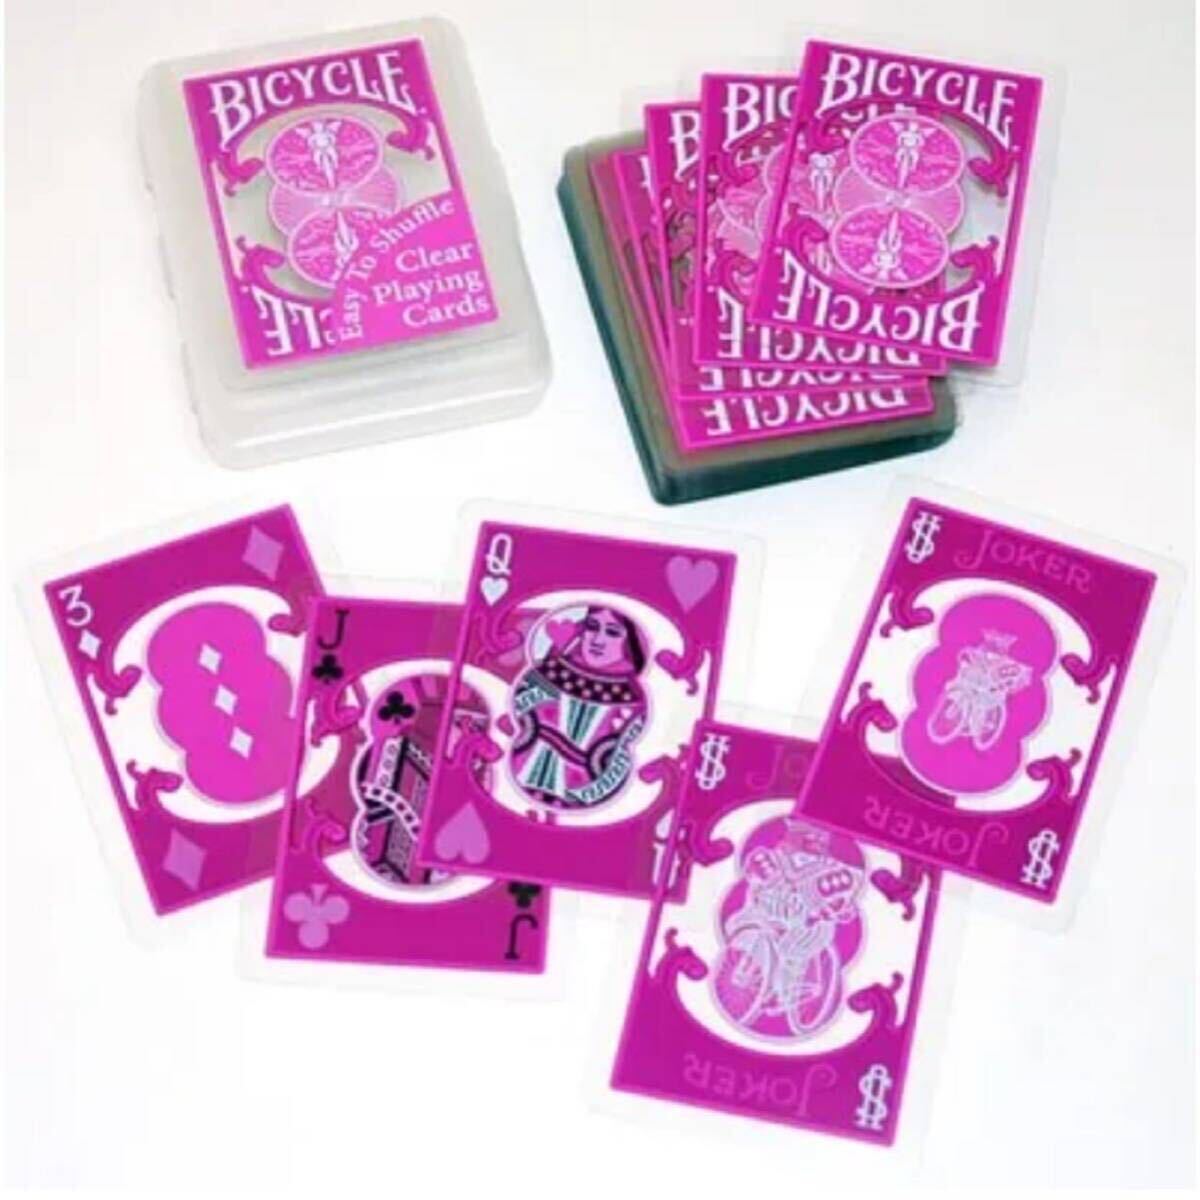 Bicycle Clear Playing Cards バイスクル クリア トランプ ピンク【絶版】の画像3